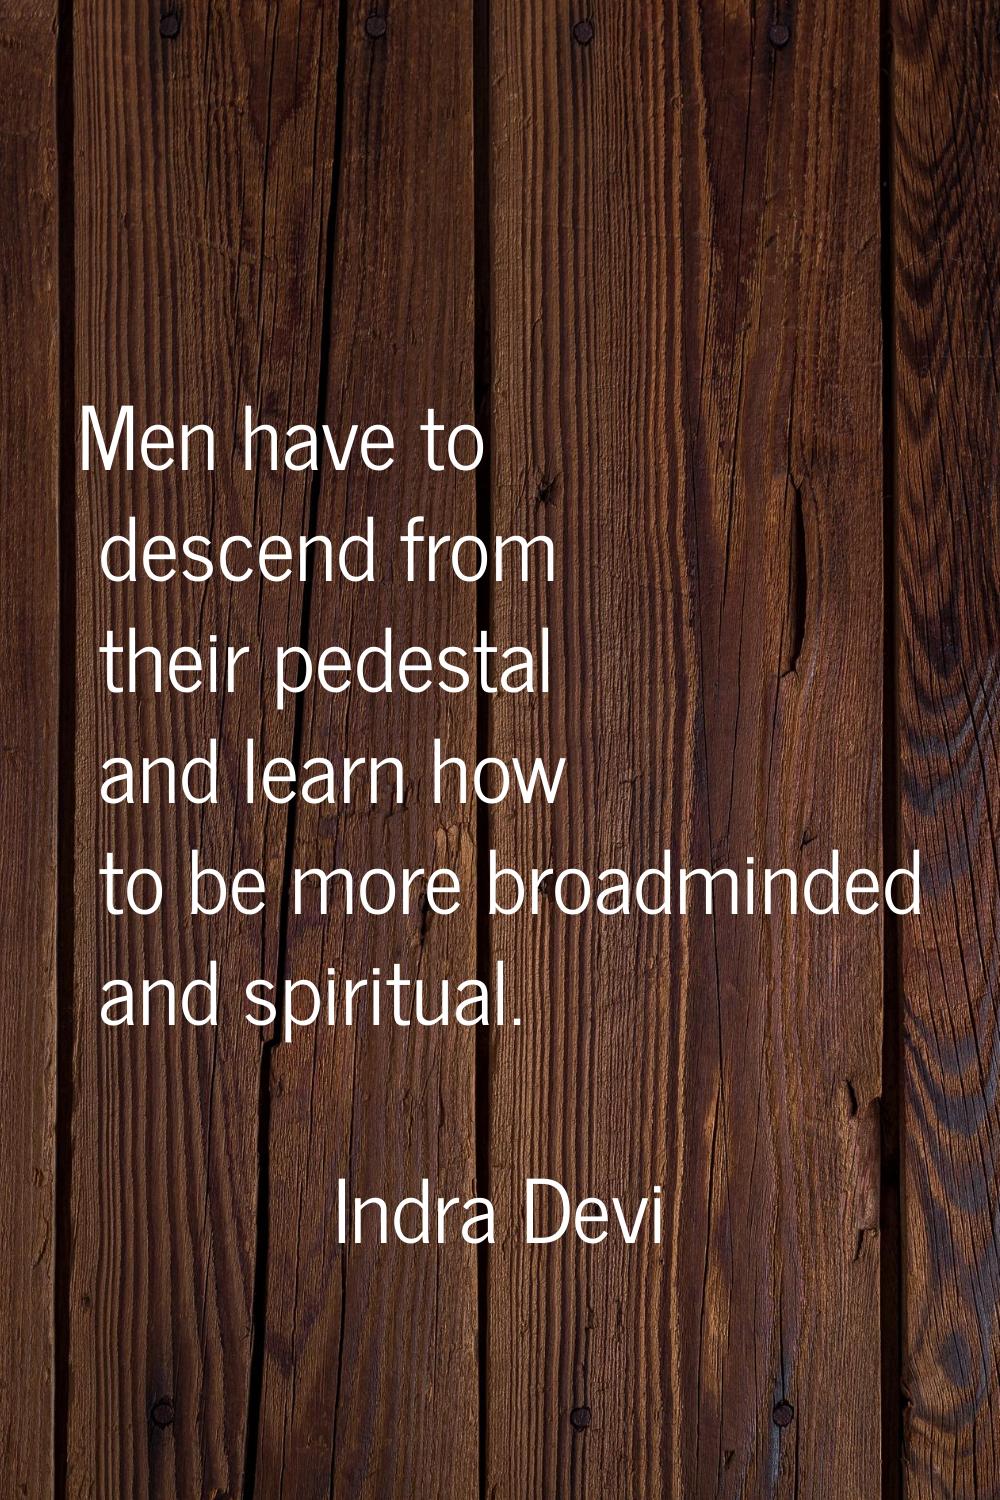 Men have to descend from their pedestal and learn how to be more broadminded and spiritual.